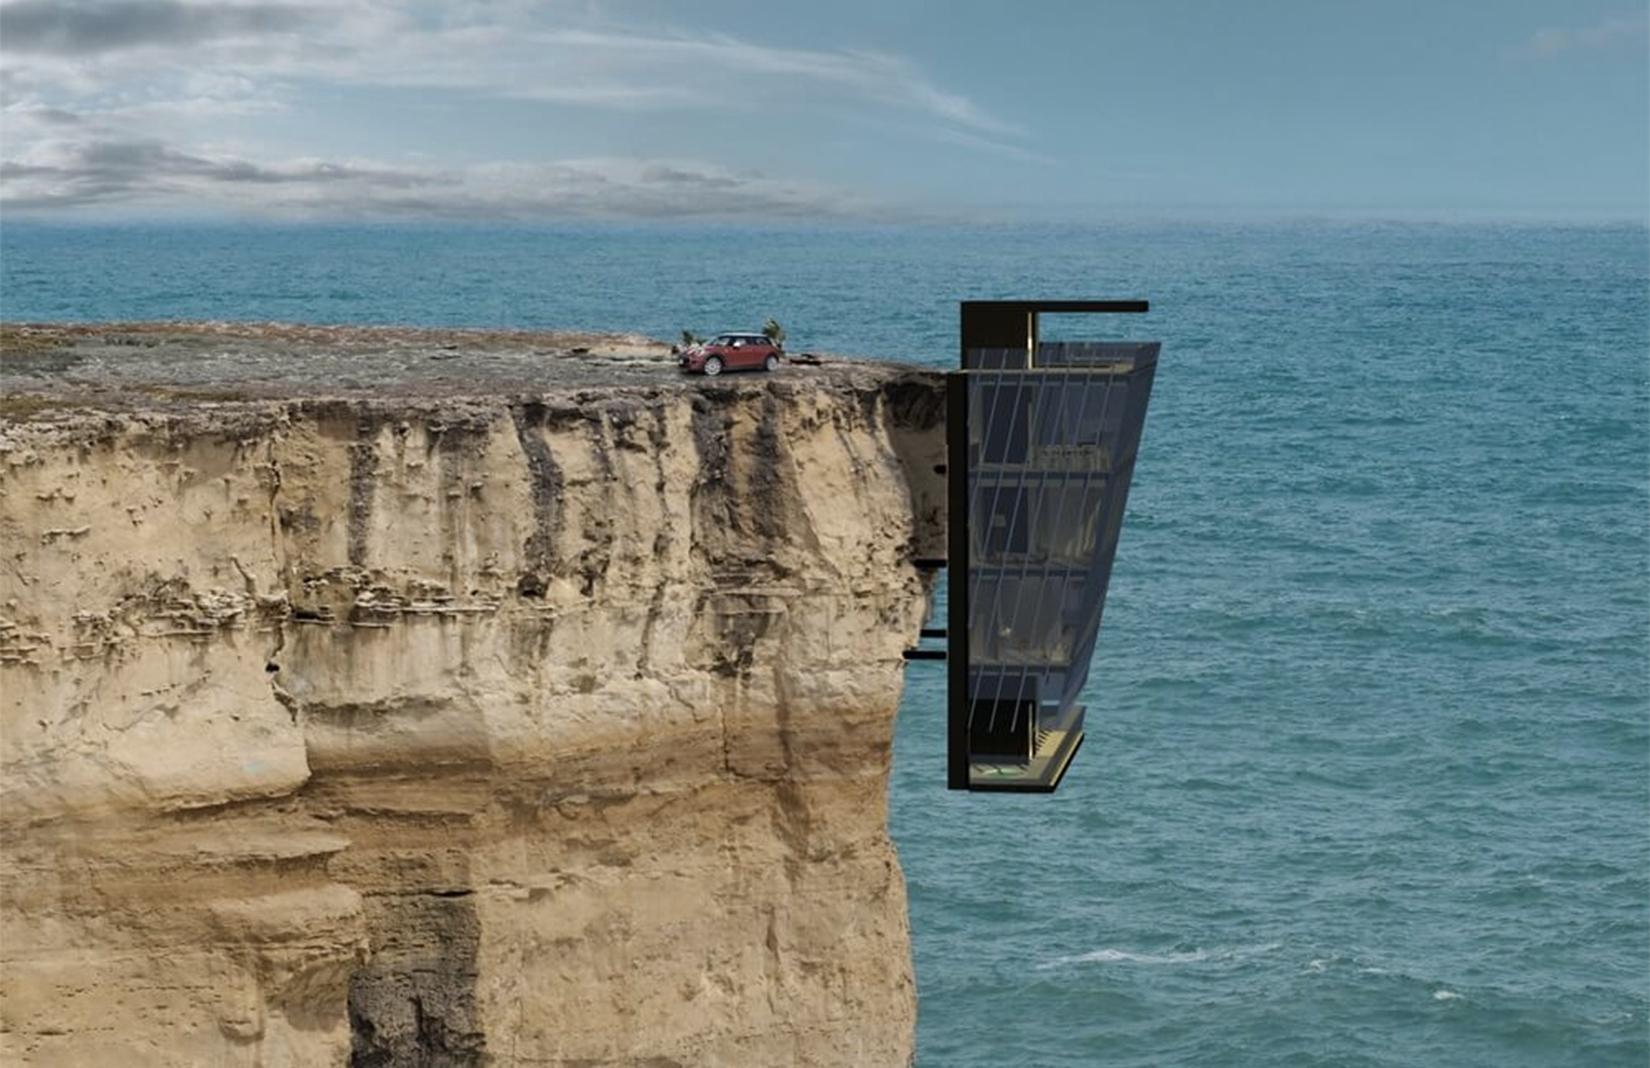 Modscape's Cliff House prefab is a parasitic design that appears the dangle over the sea